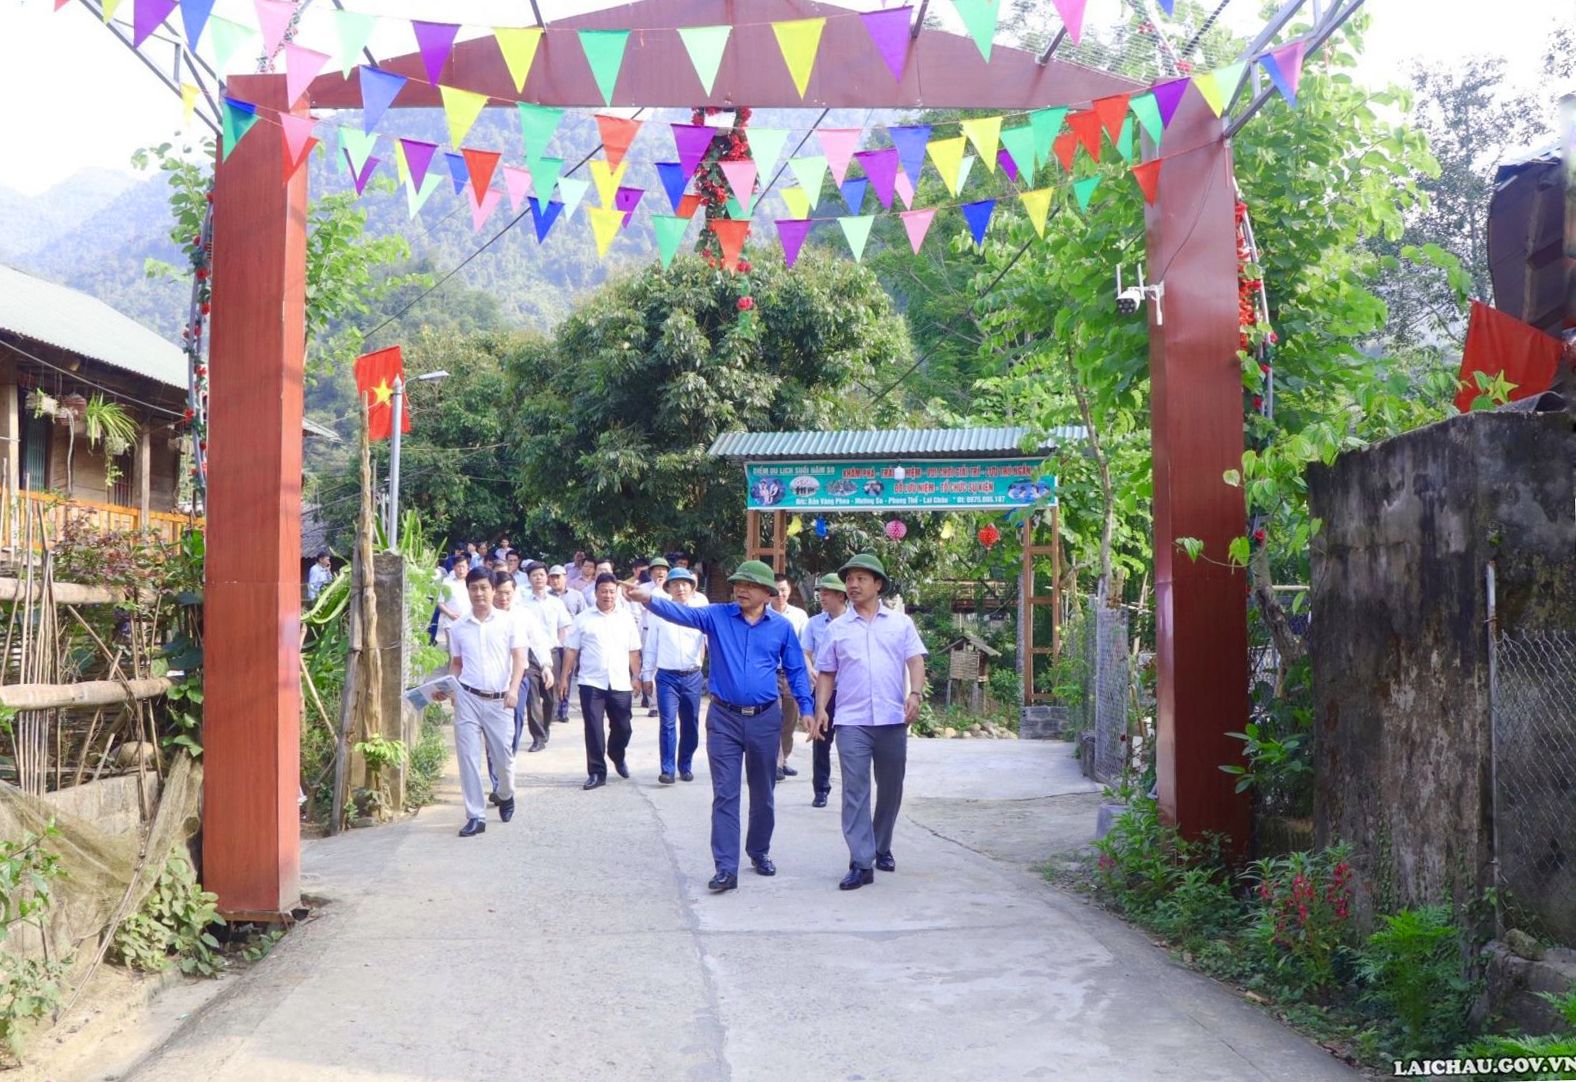 Lai Chau is the province with the leading agricultural development support policy in the country